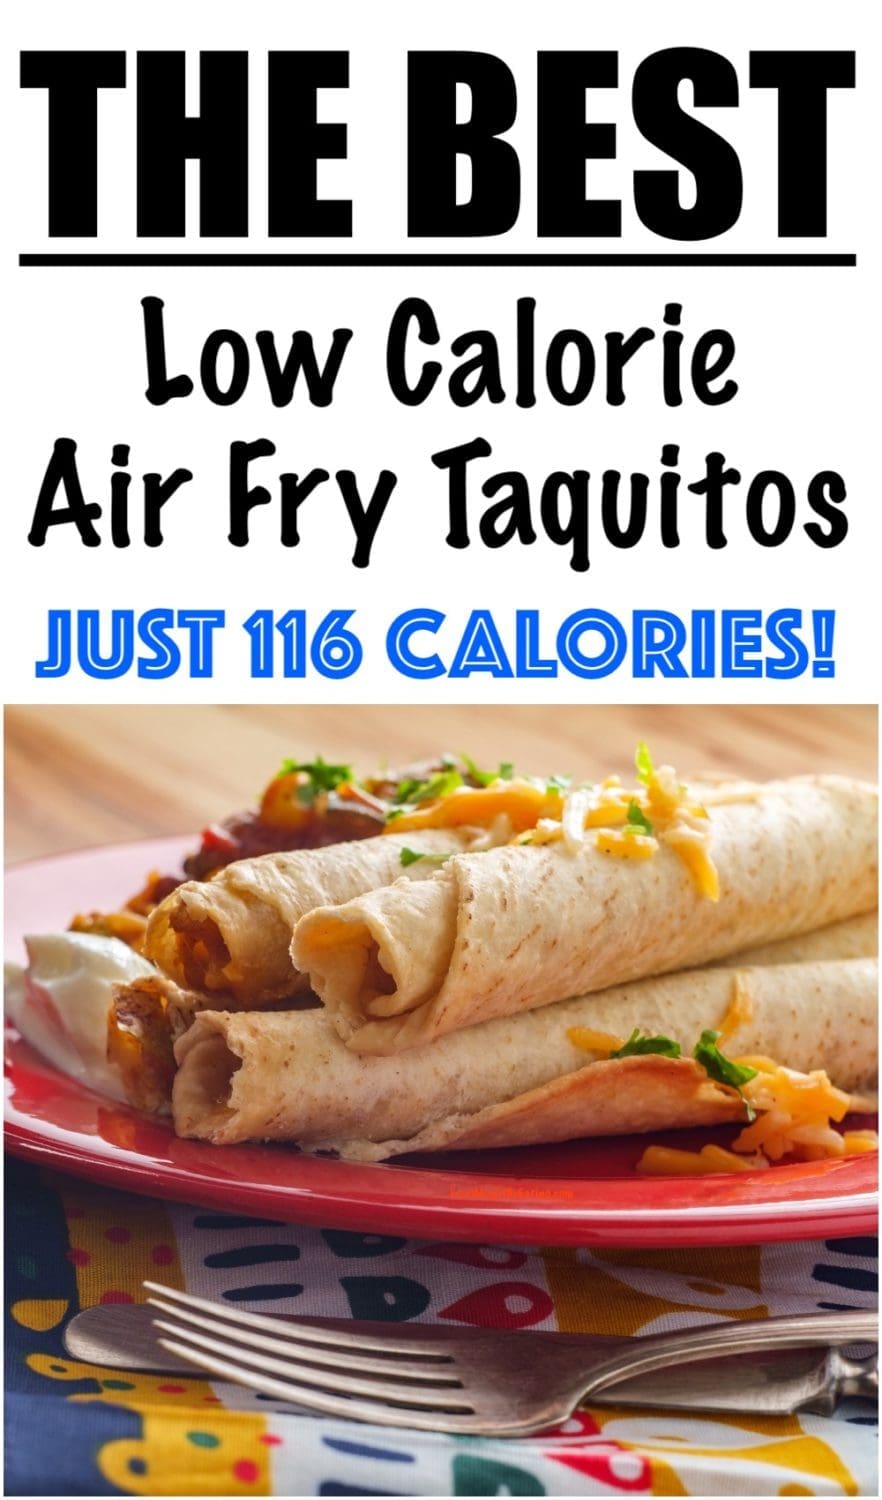 Air Fryer Taquitos with Chicken and Cheese